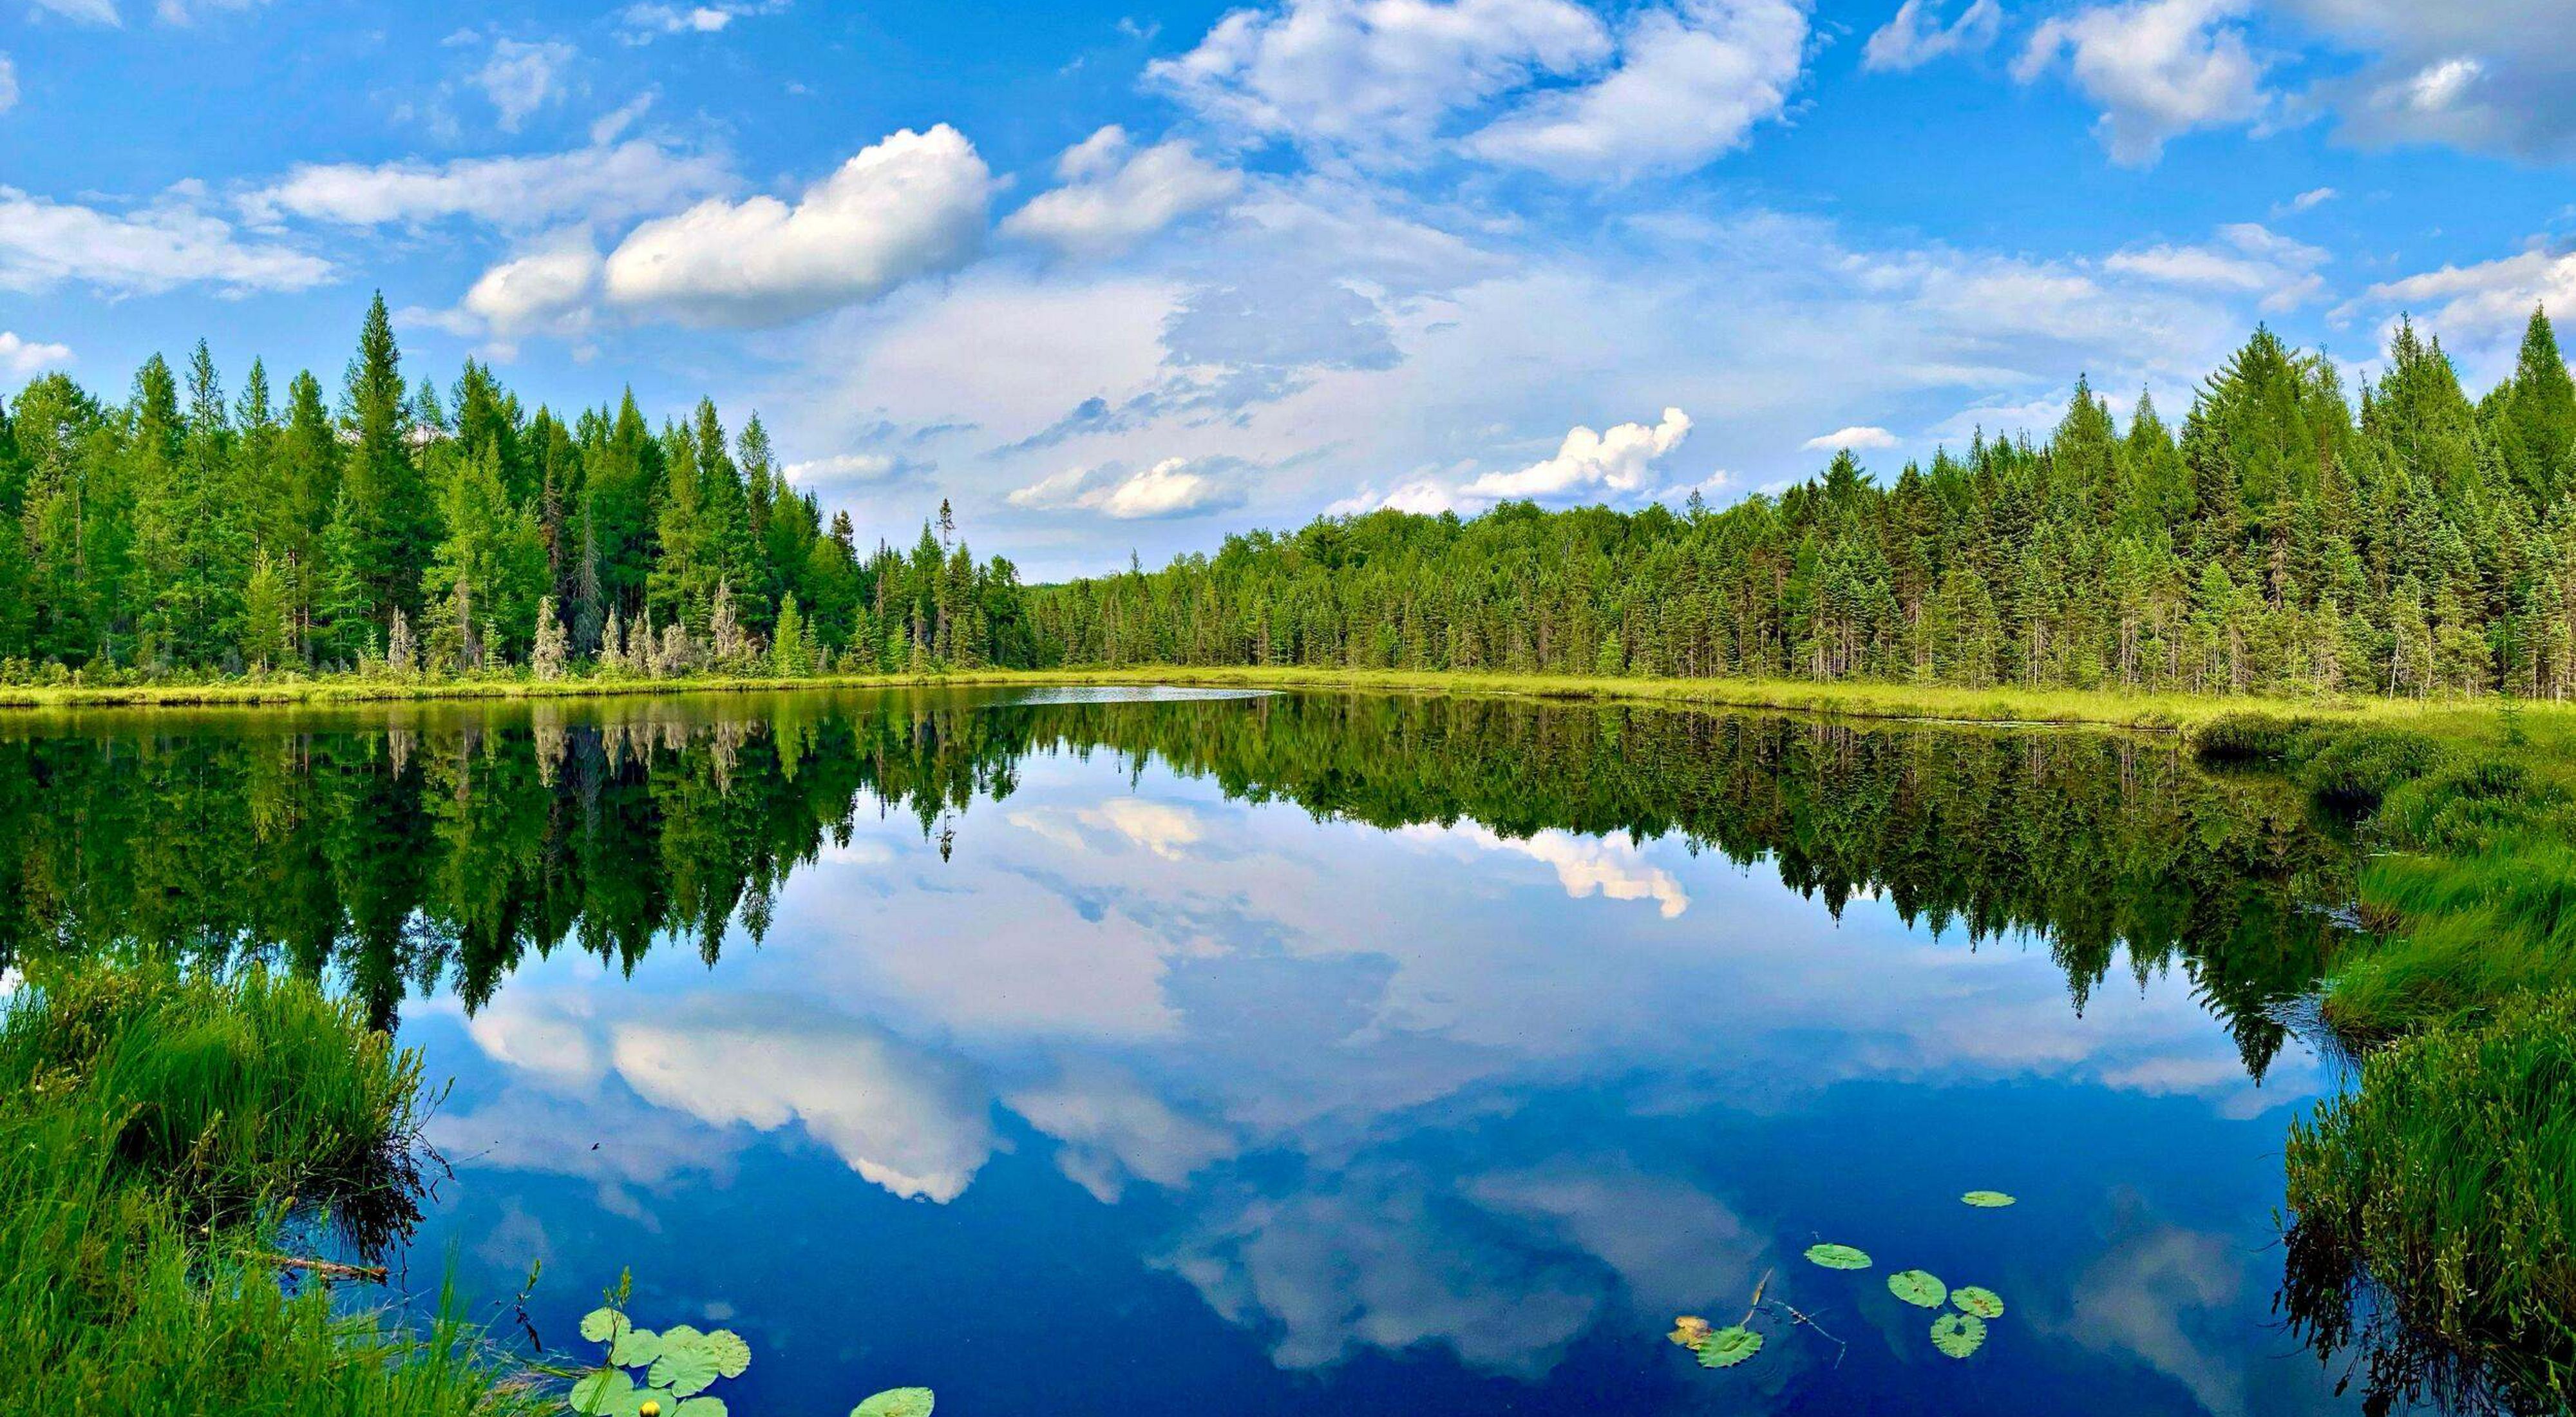 Evergreen trees bordering a lake that is reflecting a bright blue sky with white clouds.